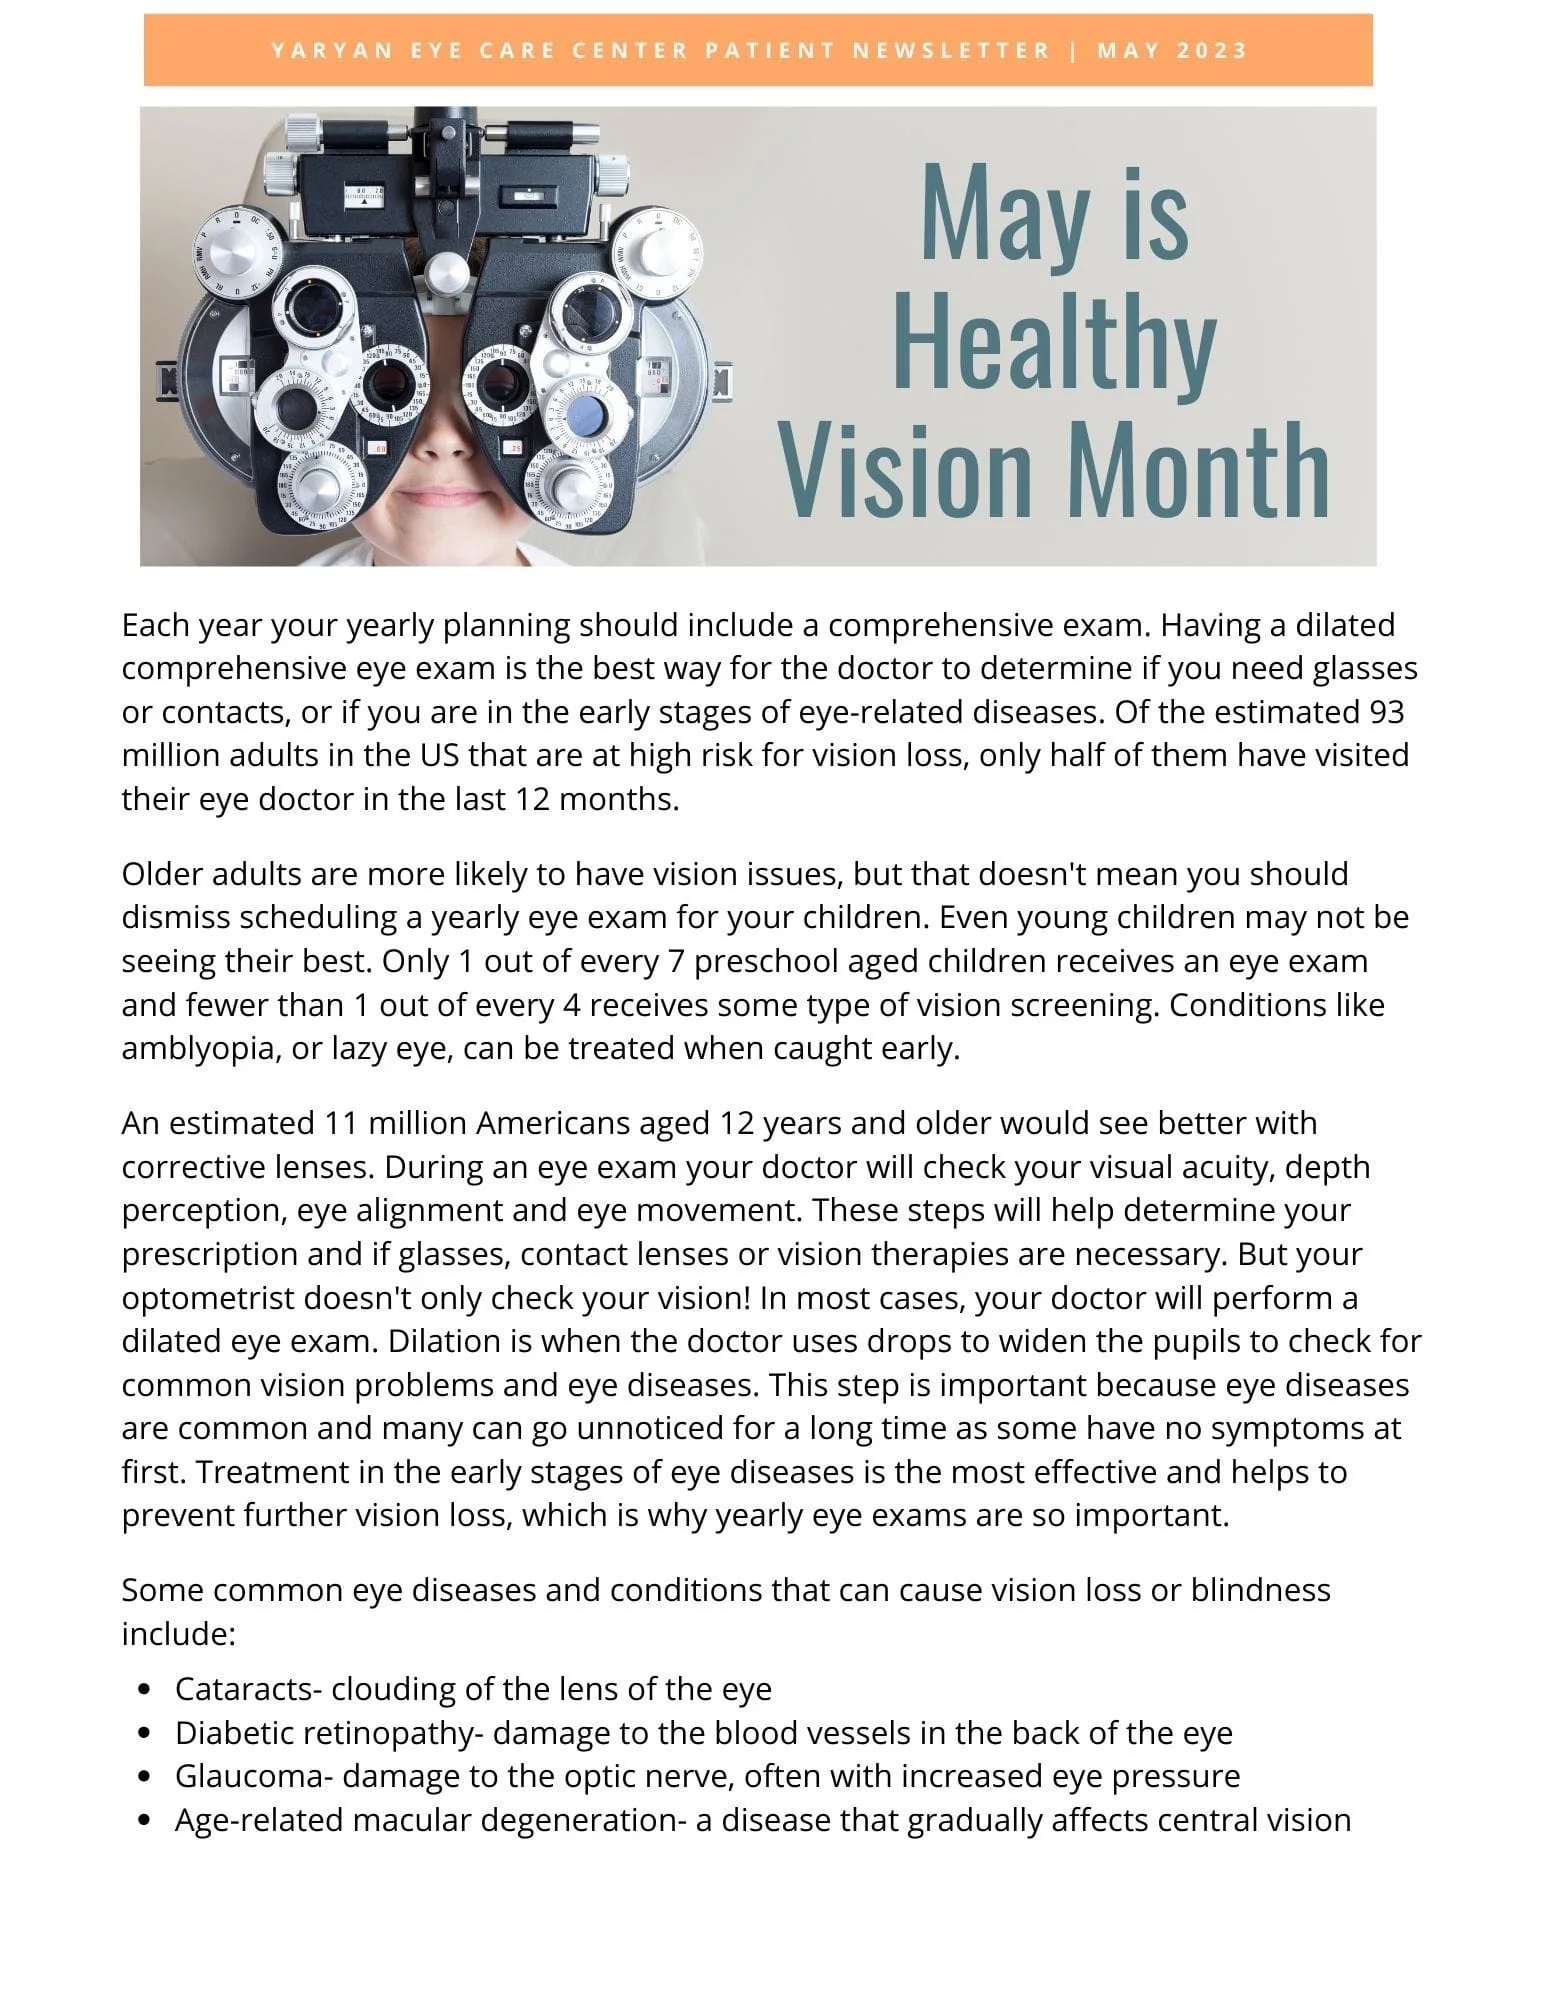 May 2023 Patient Newsletter (Healthy Vision Month)